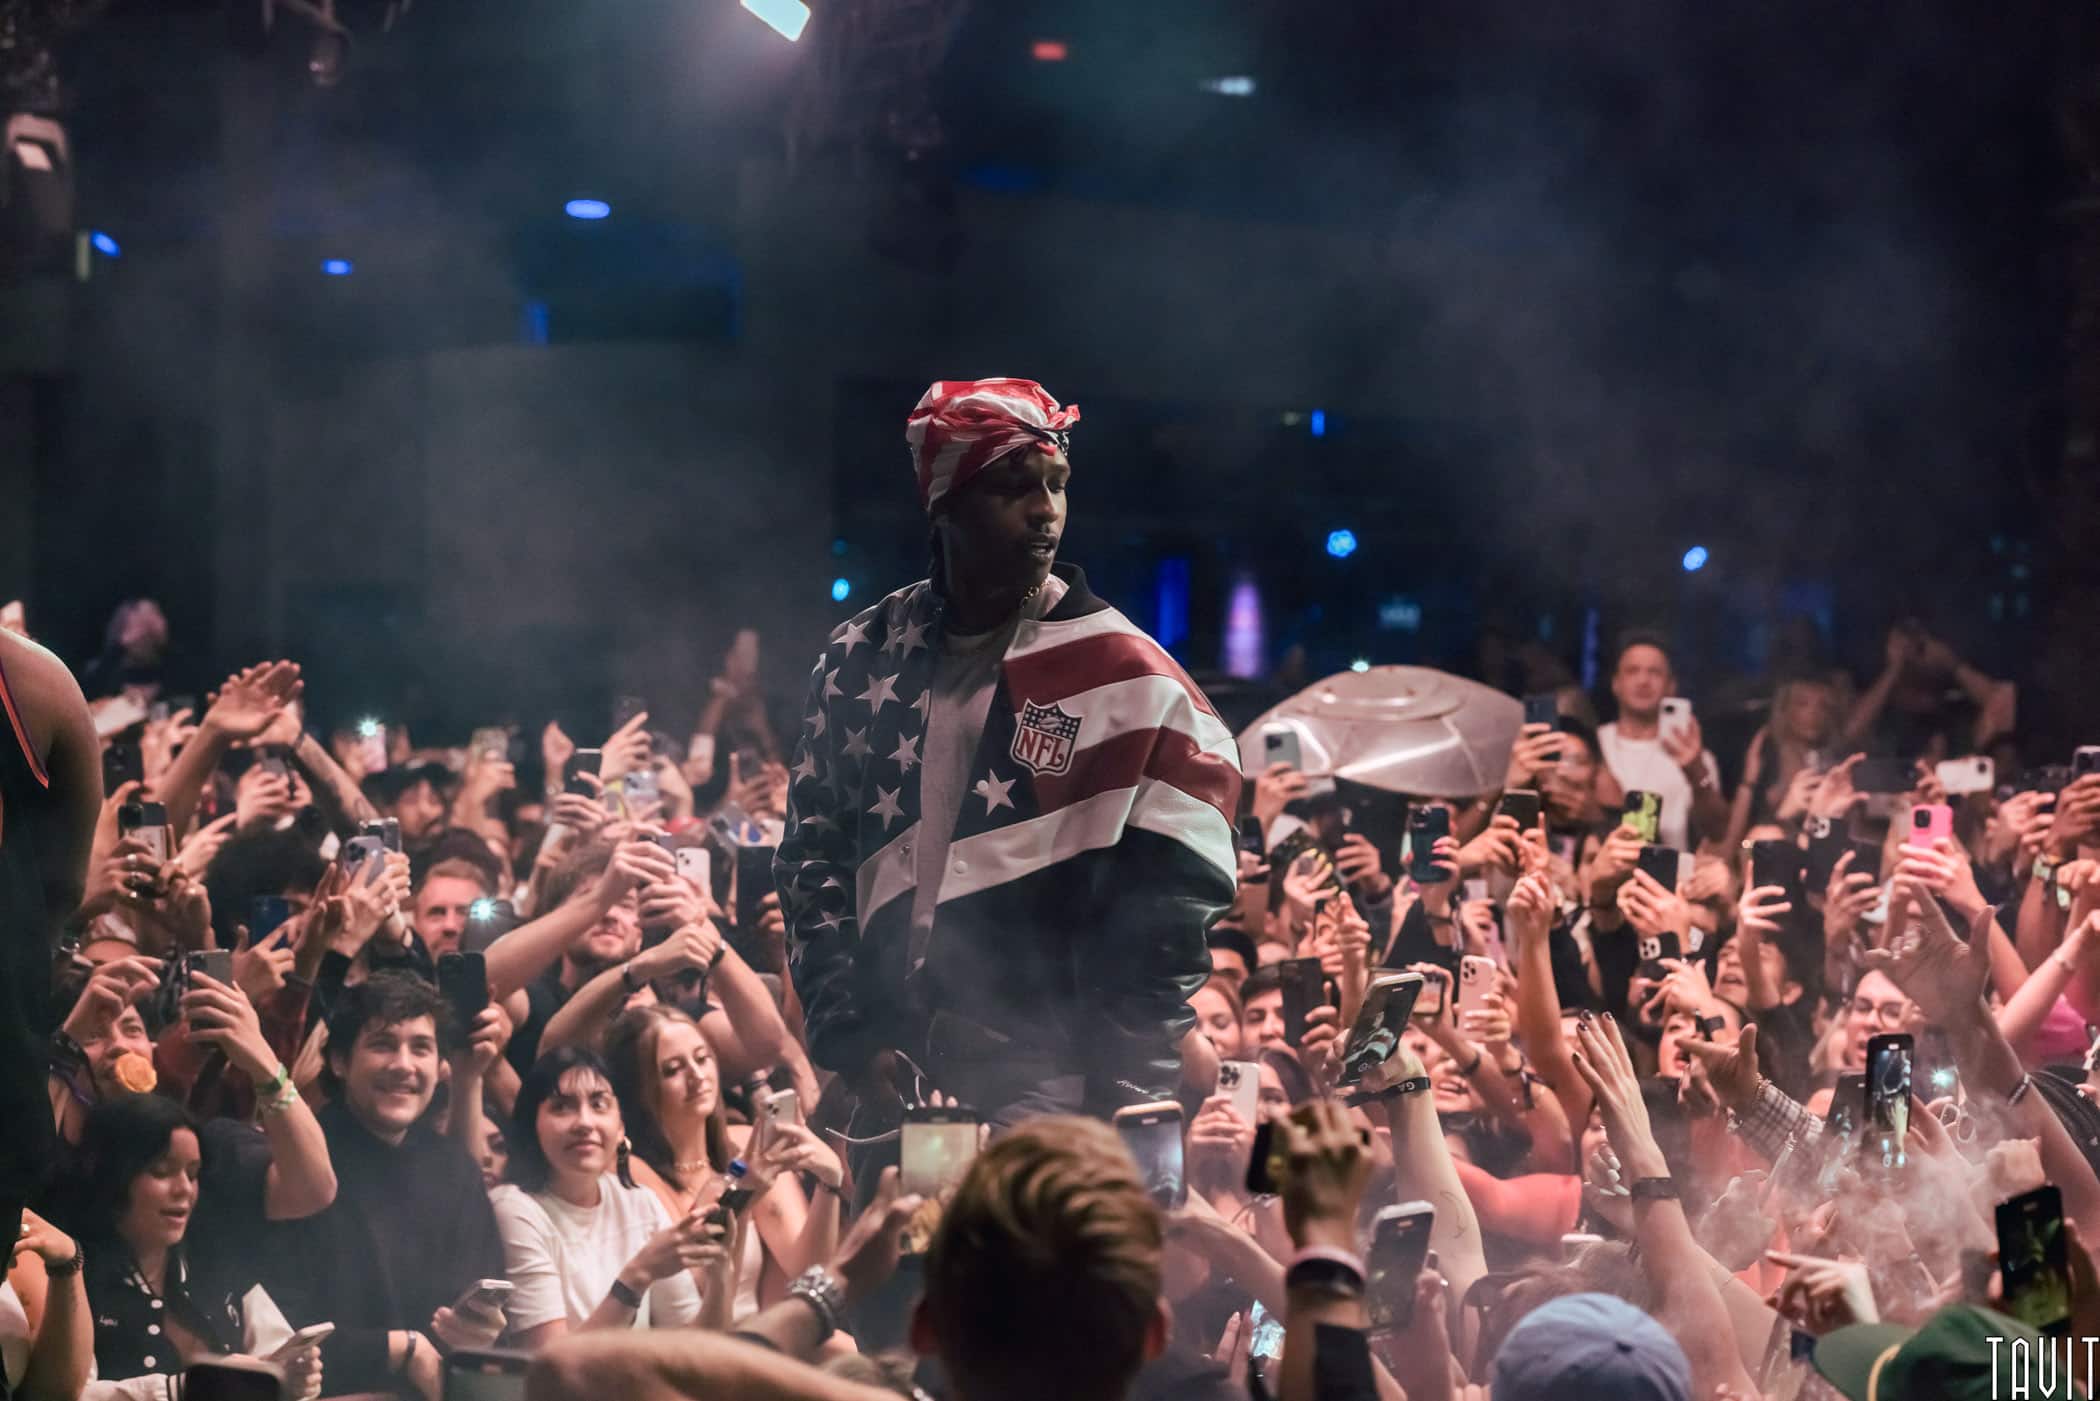 ASAP Rocky on stage in NFL American flag jacket